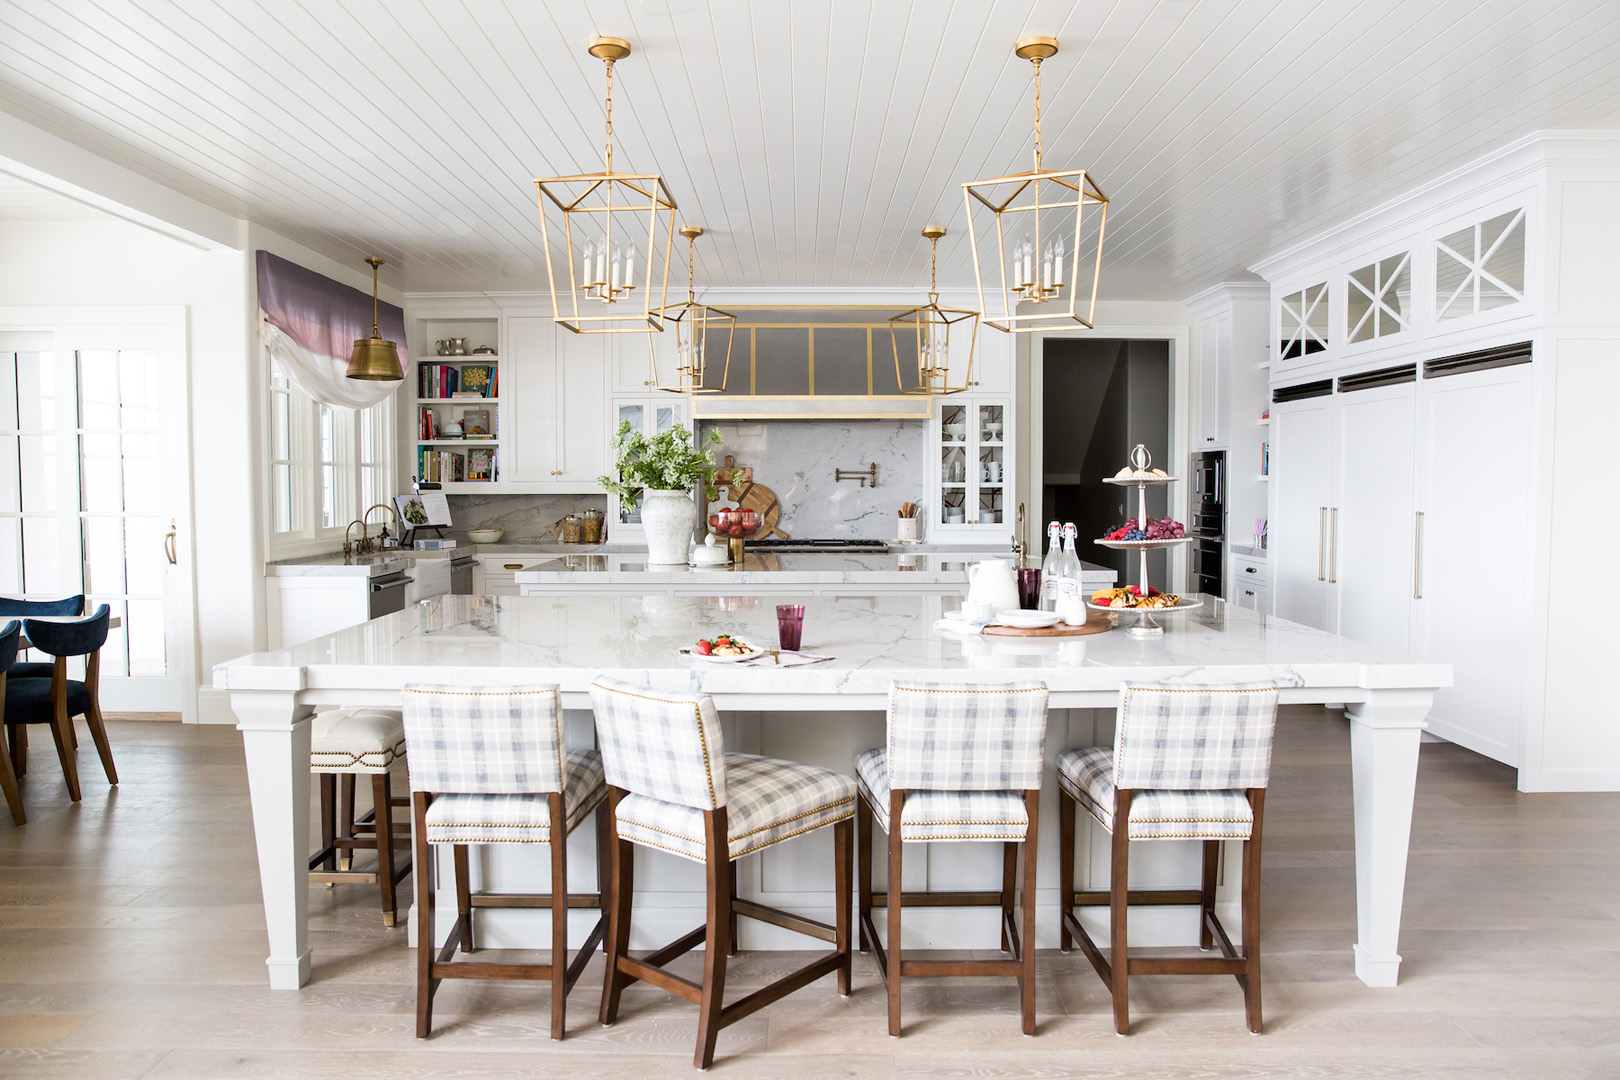 Traditional White Kitchen Design With Alice Lane